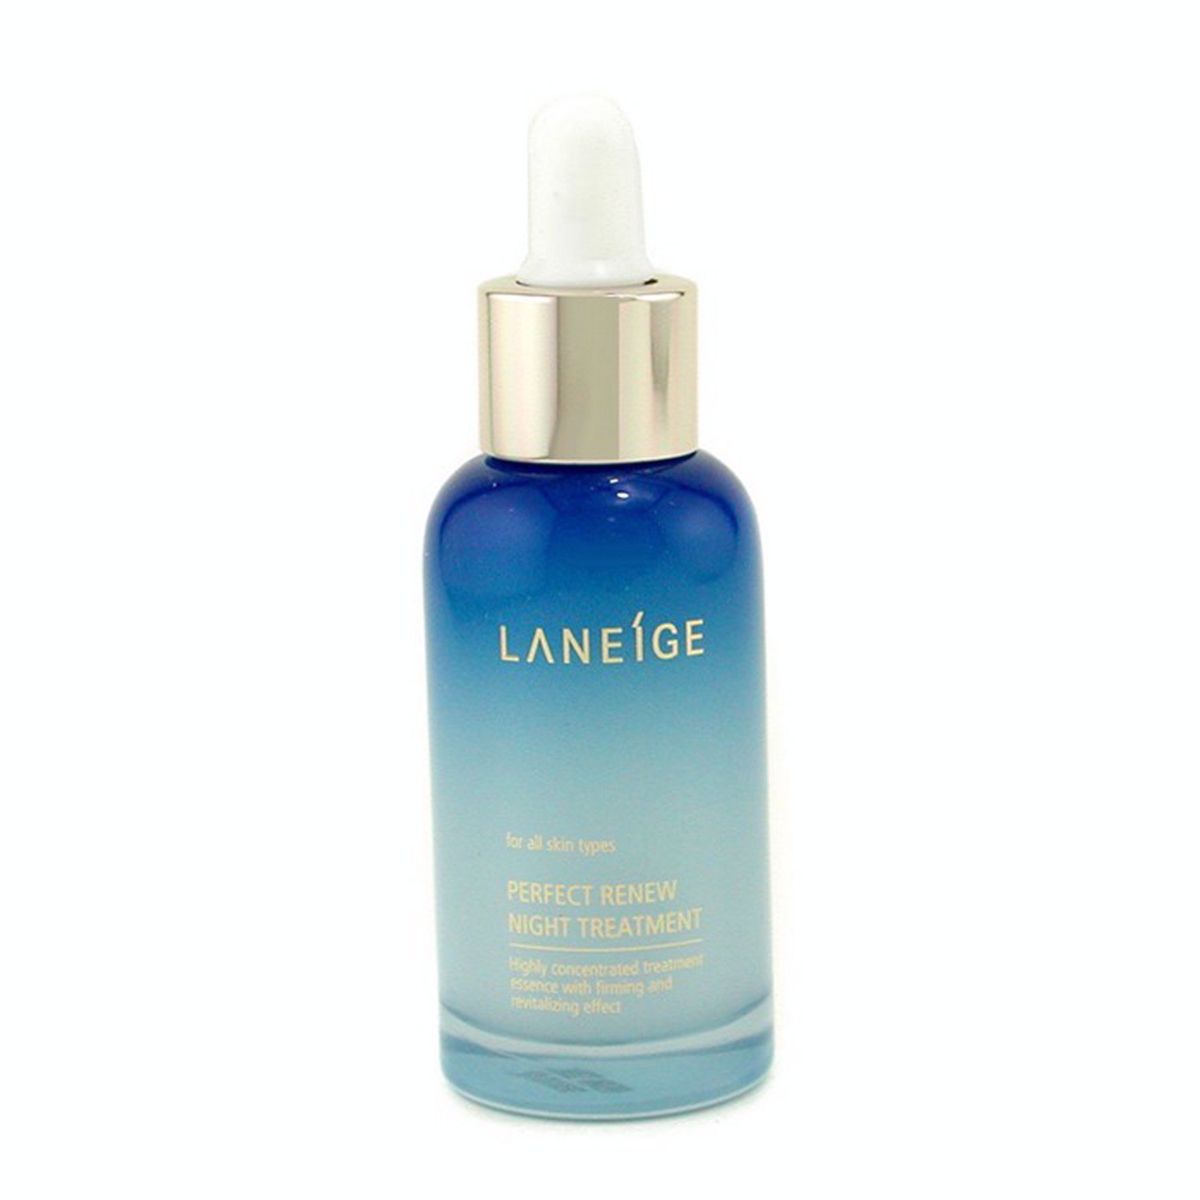 Perfect Renew Night Treatment (Manufacture Date: 05/2014) Laneige Image